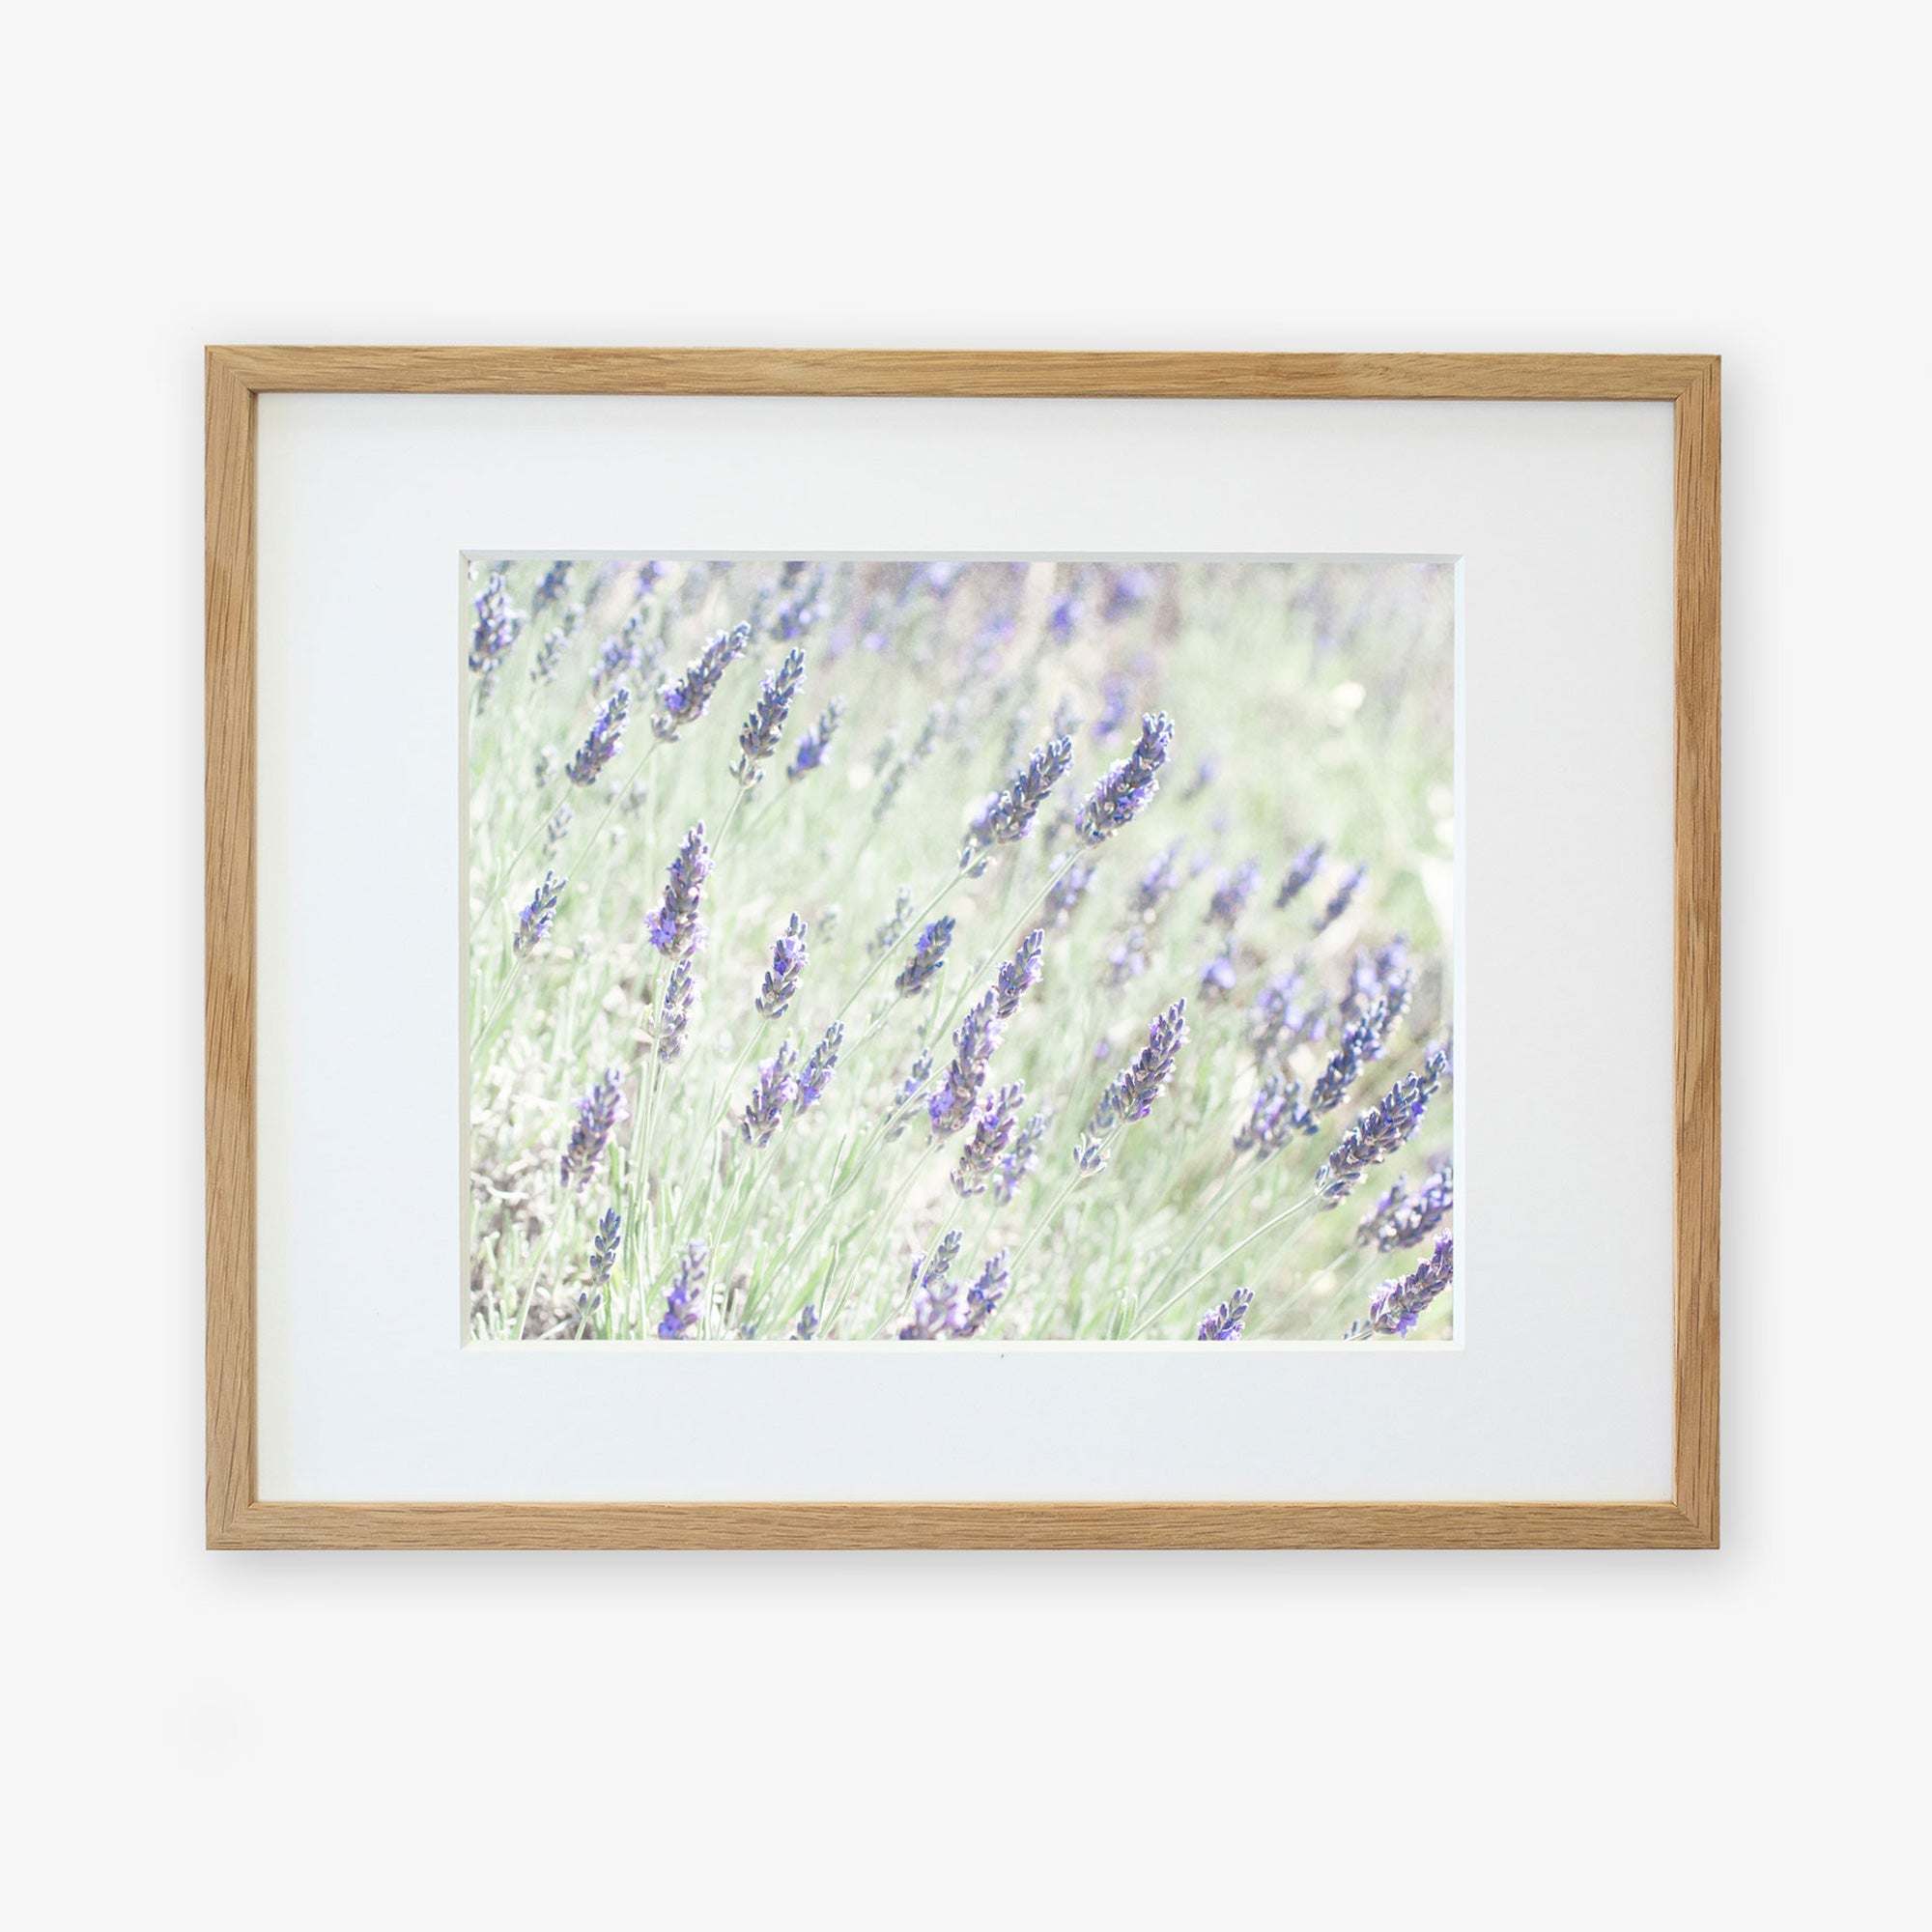 A framed photograph of Floral Purple Print, &#39;Lavender for LaLa&#39; flowers in bloom, printed on archival photographic paper, displayed with a light natural wood frame, against a white background by Offley Green.